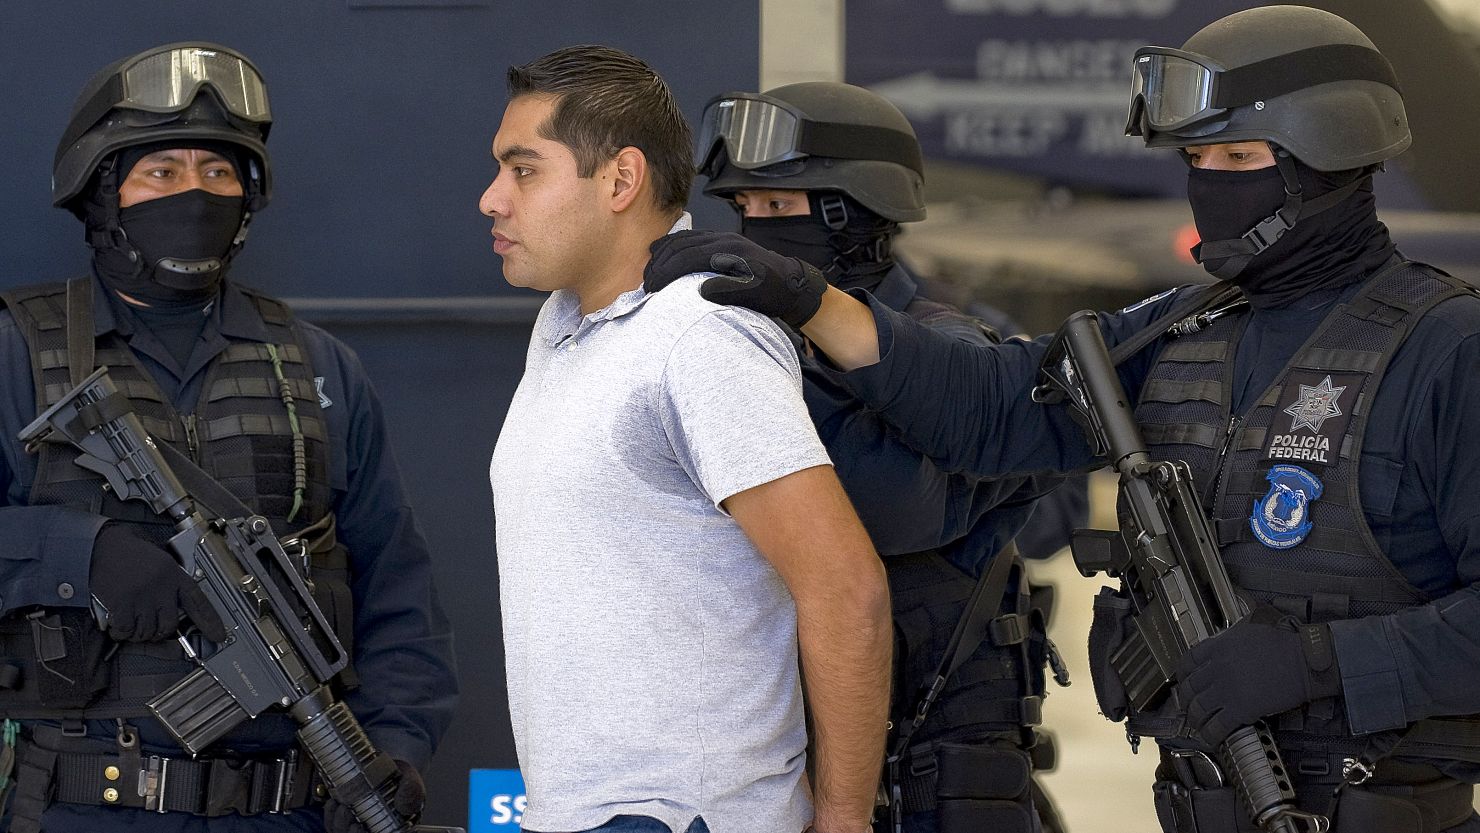 Bogard Federal police officer Felipe Lugo de Leon was arrested in connection with a deadly shootout at the Mexico City airport.